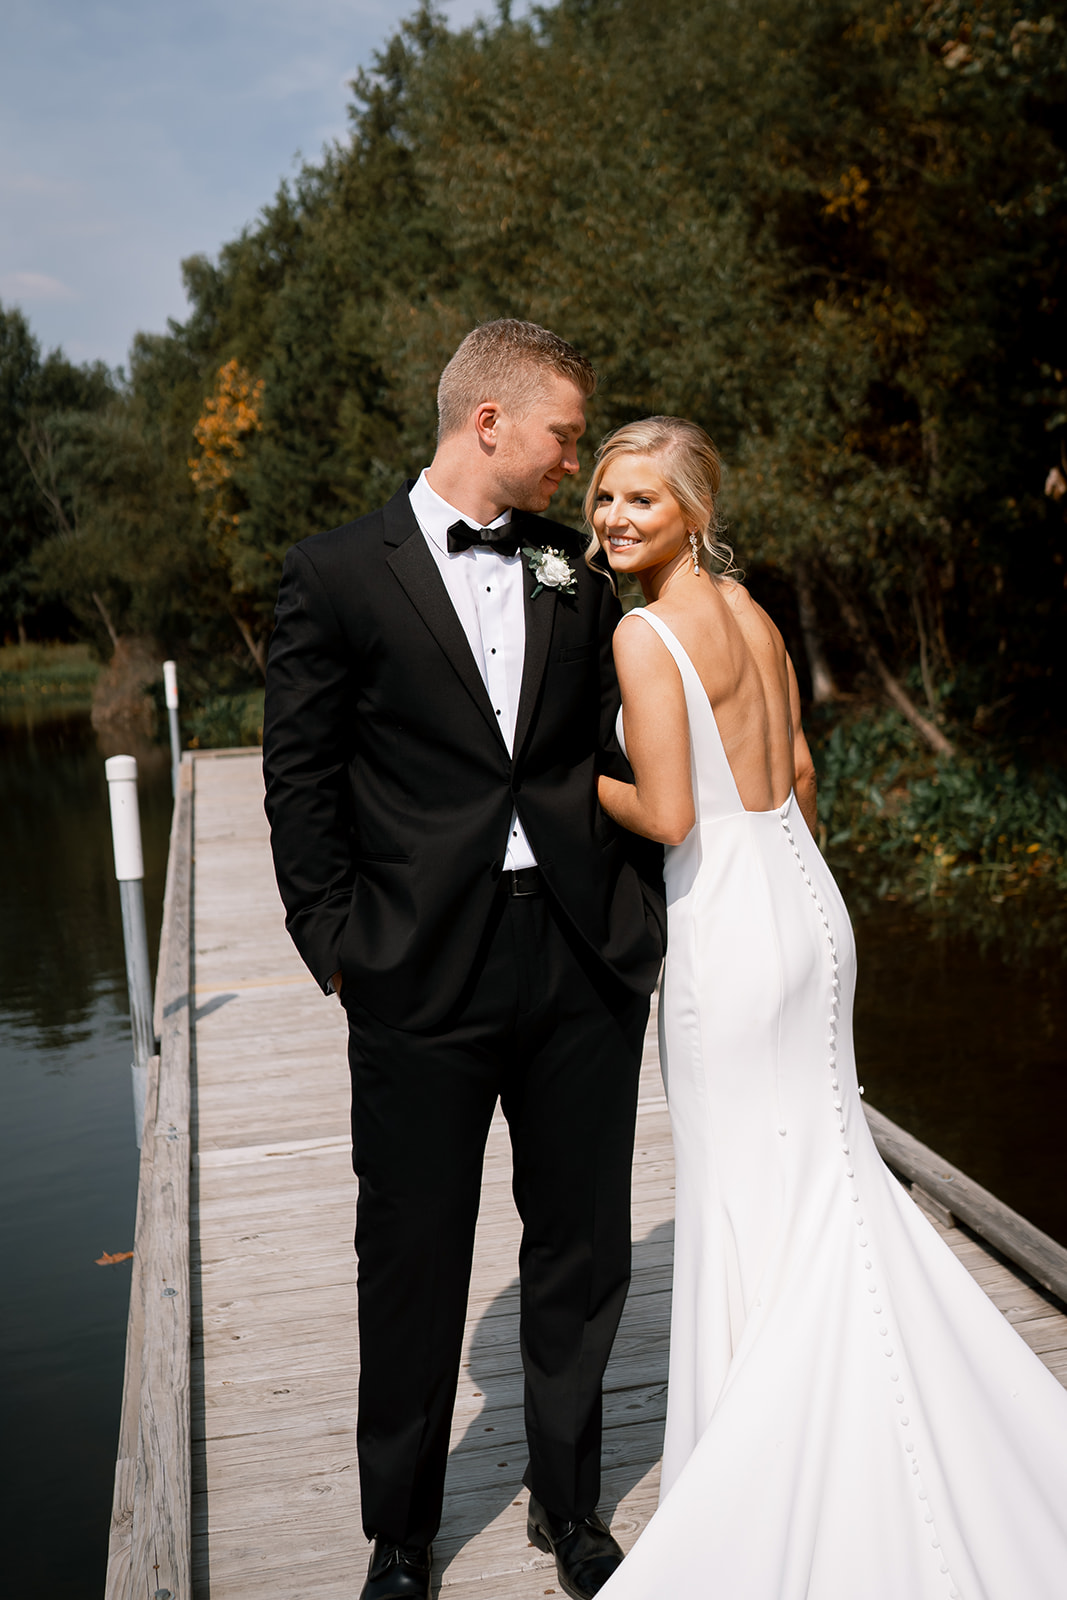 The Ultimate Guide To Planning Your St. Louis Wedding